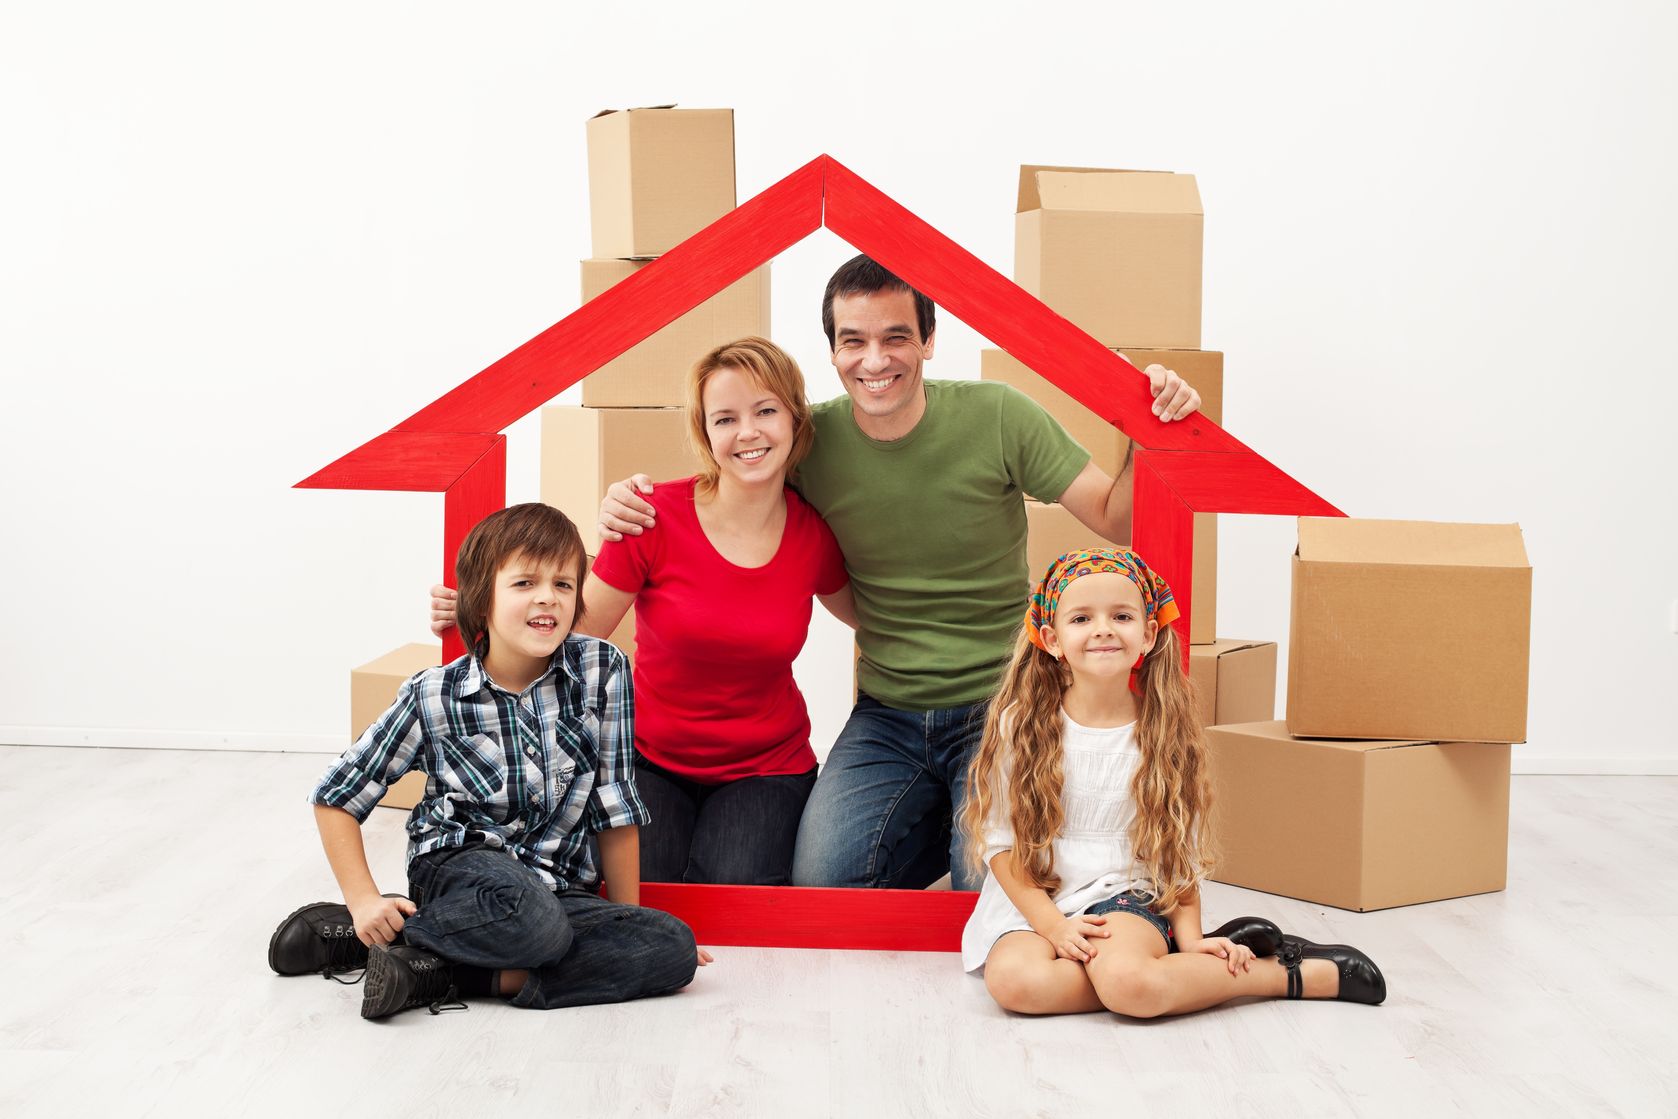 New England Homeowners Insurance